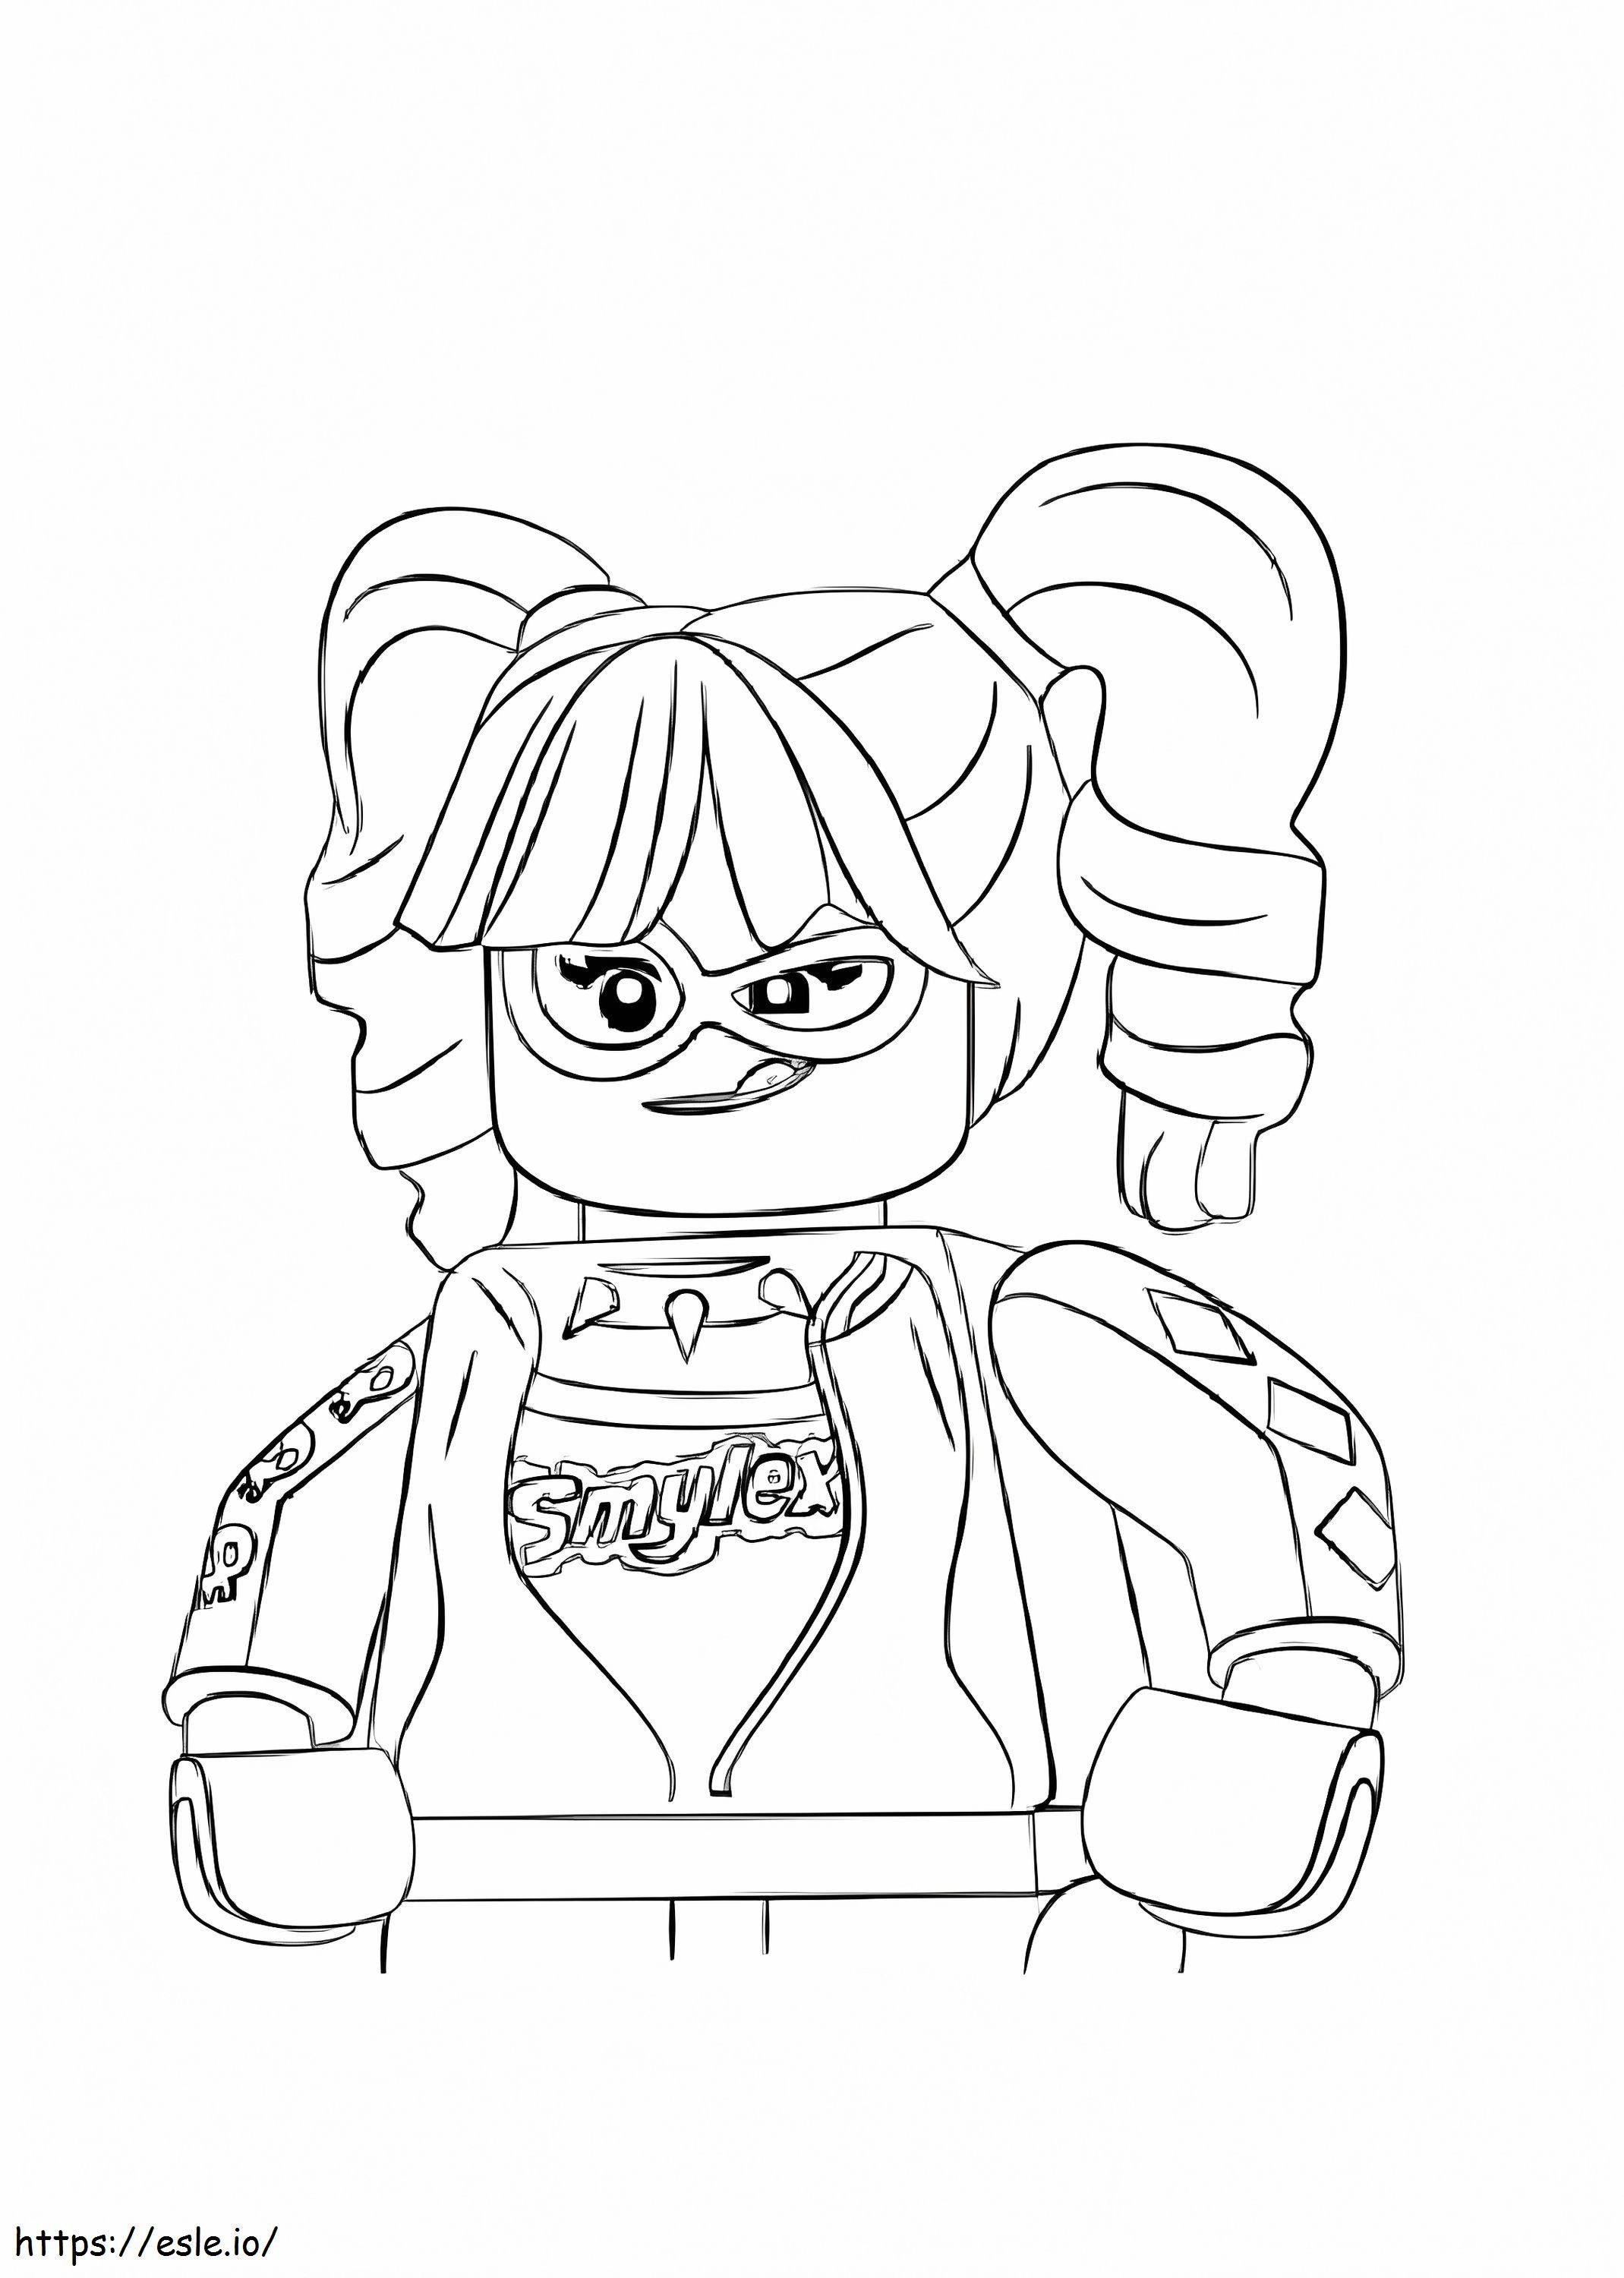 Lego Harley Quinn Portrait coloring page